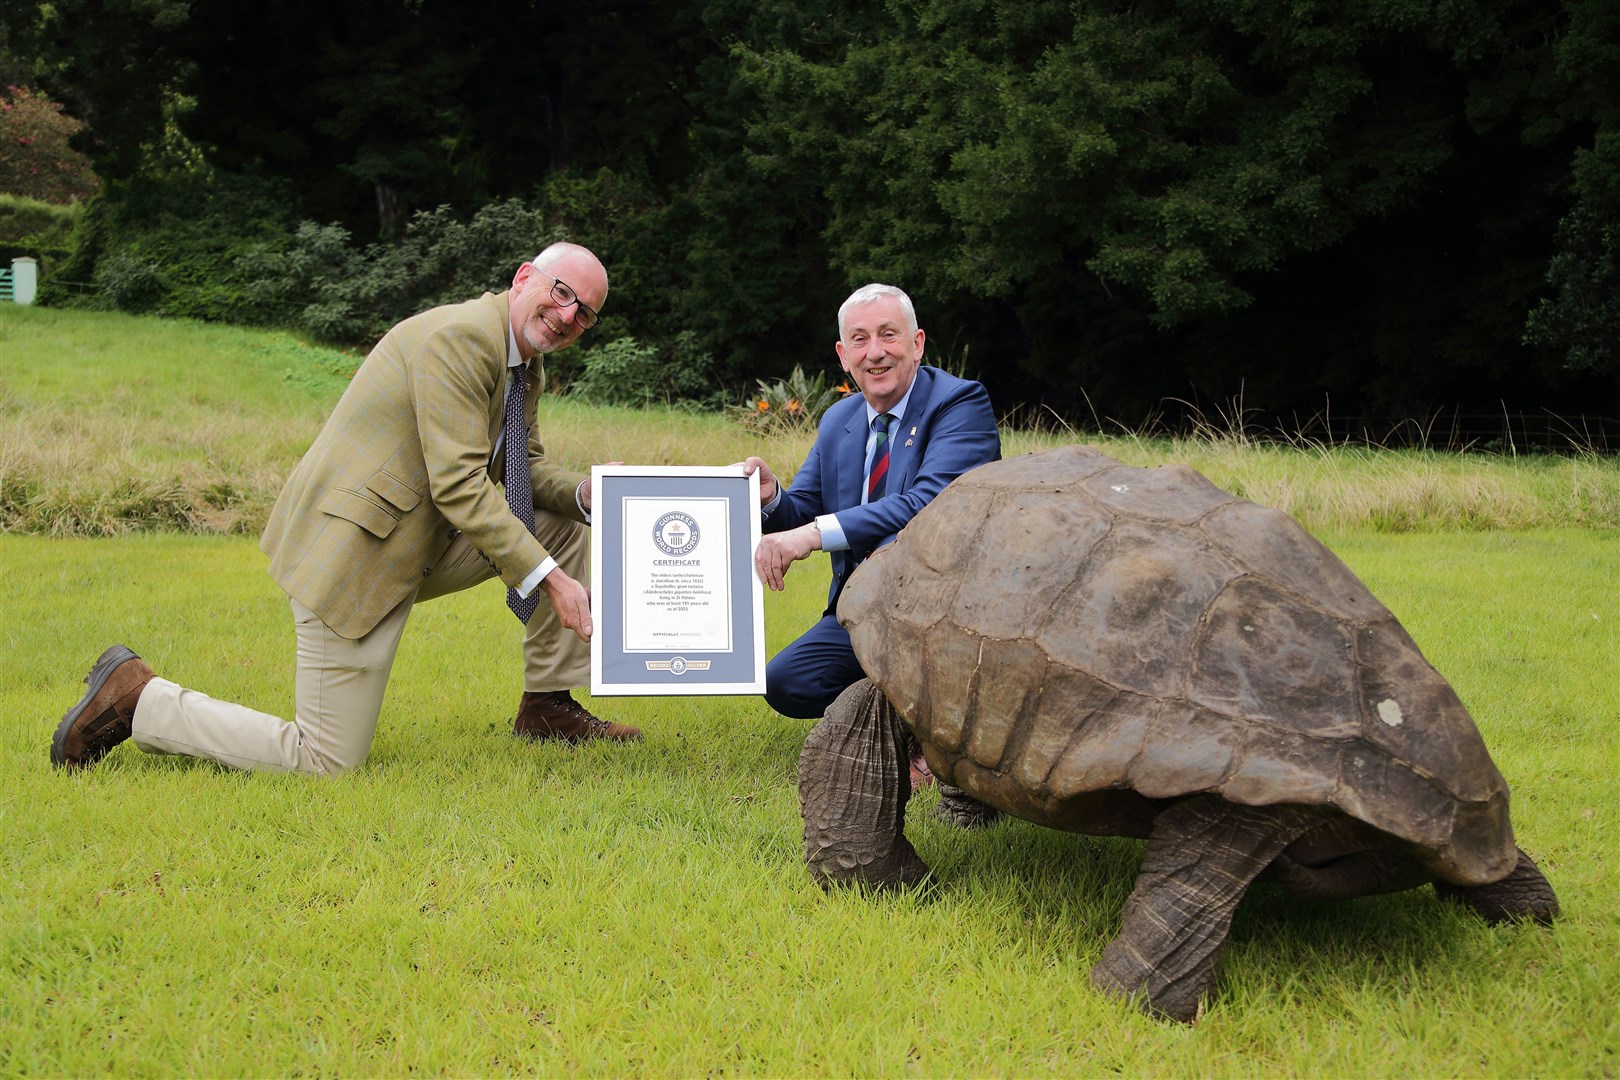 Sir Lindsay Hoyle with St Helena governor Nigel Phillips and Jonathan the tortoise (Damien O’Bey/St Helena Government/PA)